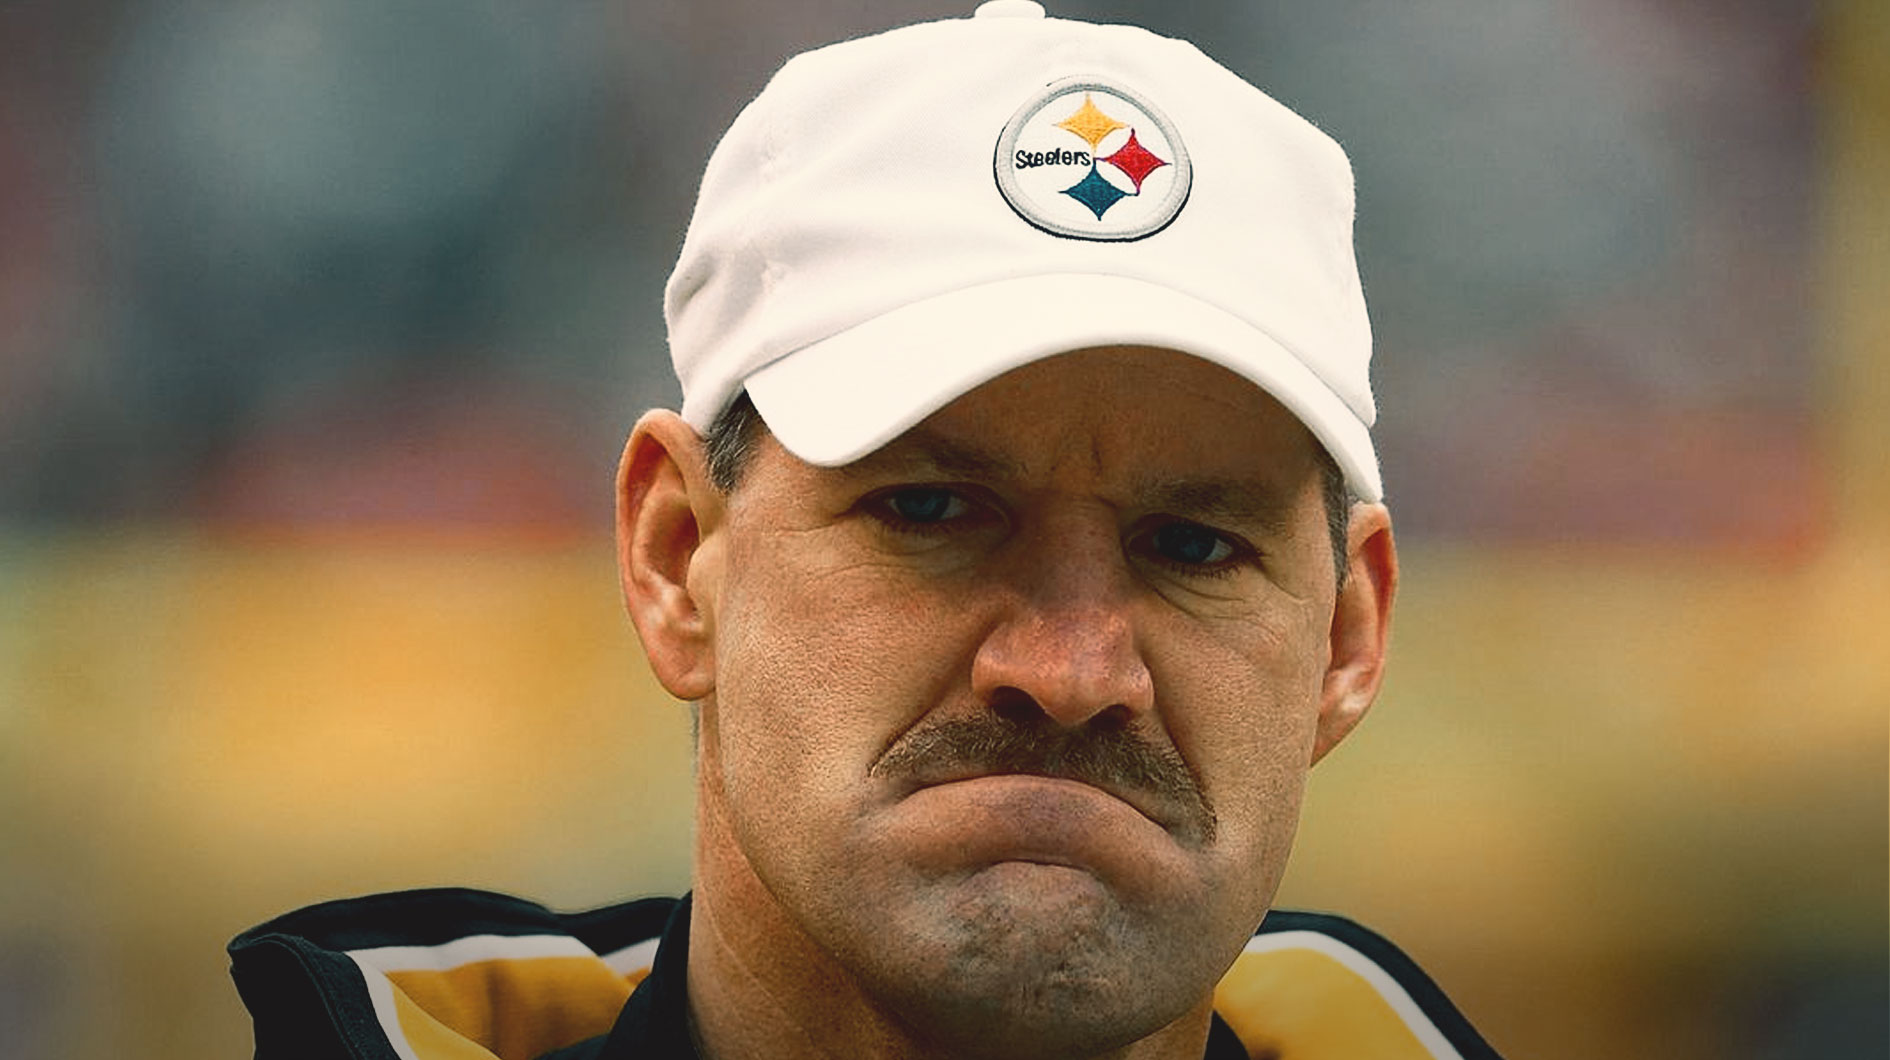 Former Steelers coach Cowher recovered from Covid-19